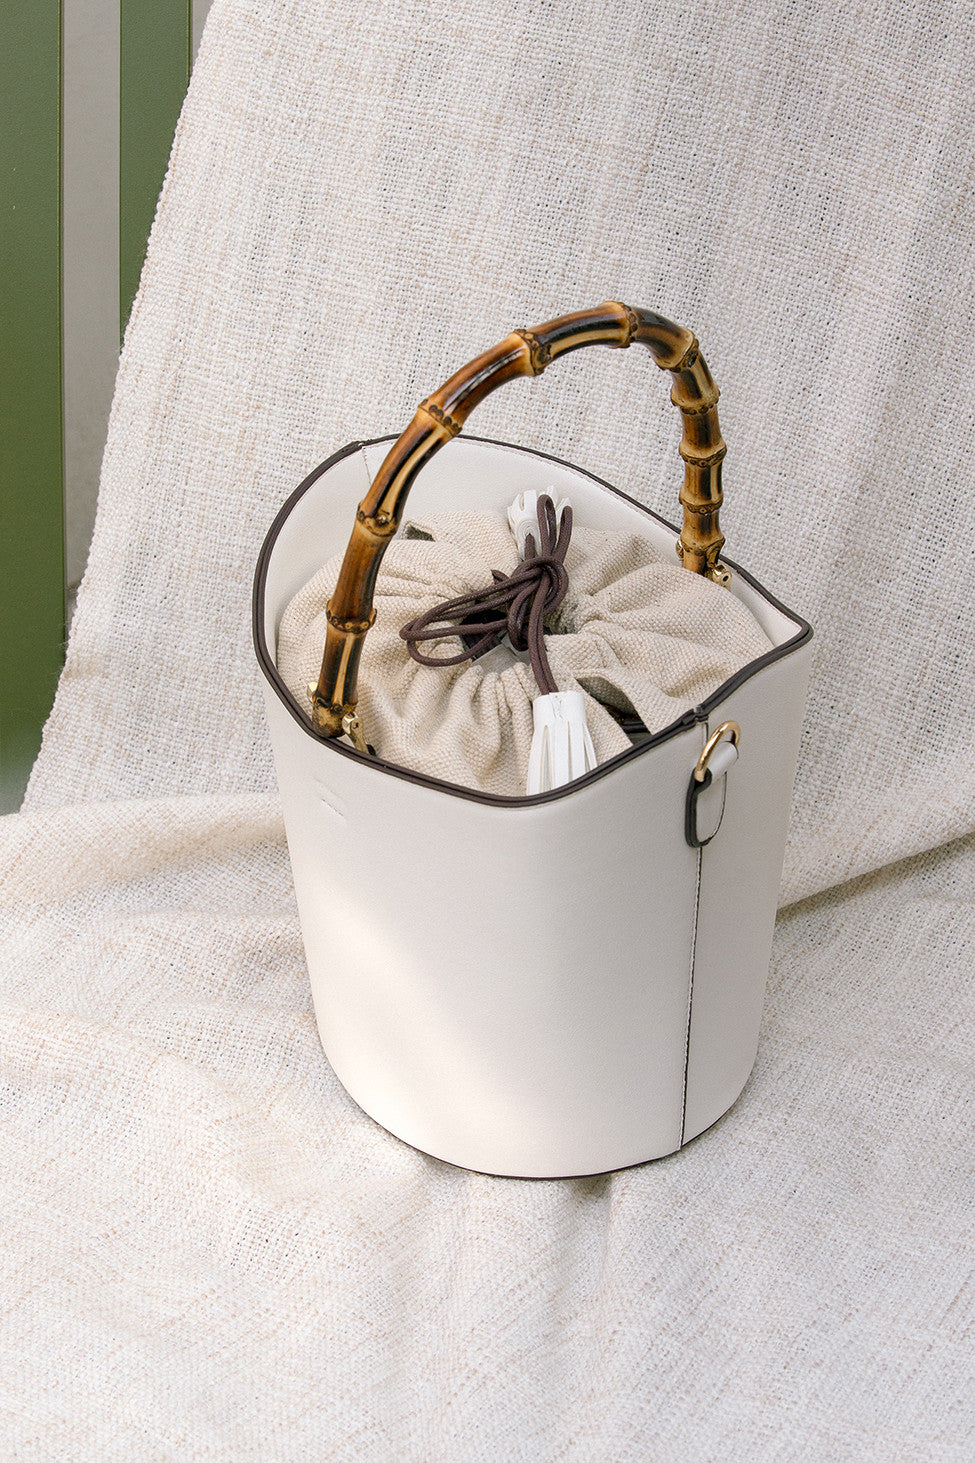 Bonet bag in White. Wooden bamboo carrying top handles. Cylindrical design. Brown drawstring fabric insert with white tassel.